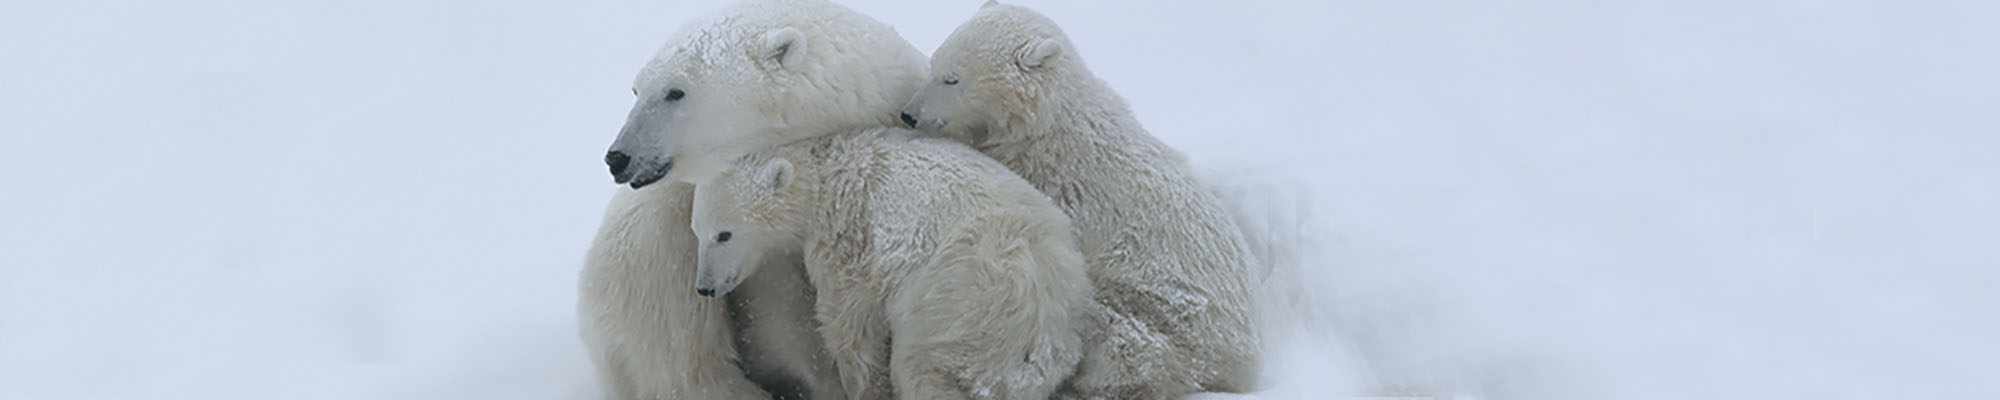 Mother polar bear (Ursus maritumus) and twin cubs (about 10-11 months old) resting in a day-bed during a snowstorm. Wapusk National Park near the edge of Hudson Bay, Manitoba, Canada.